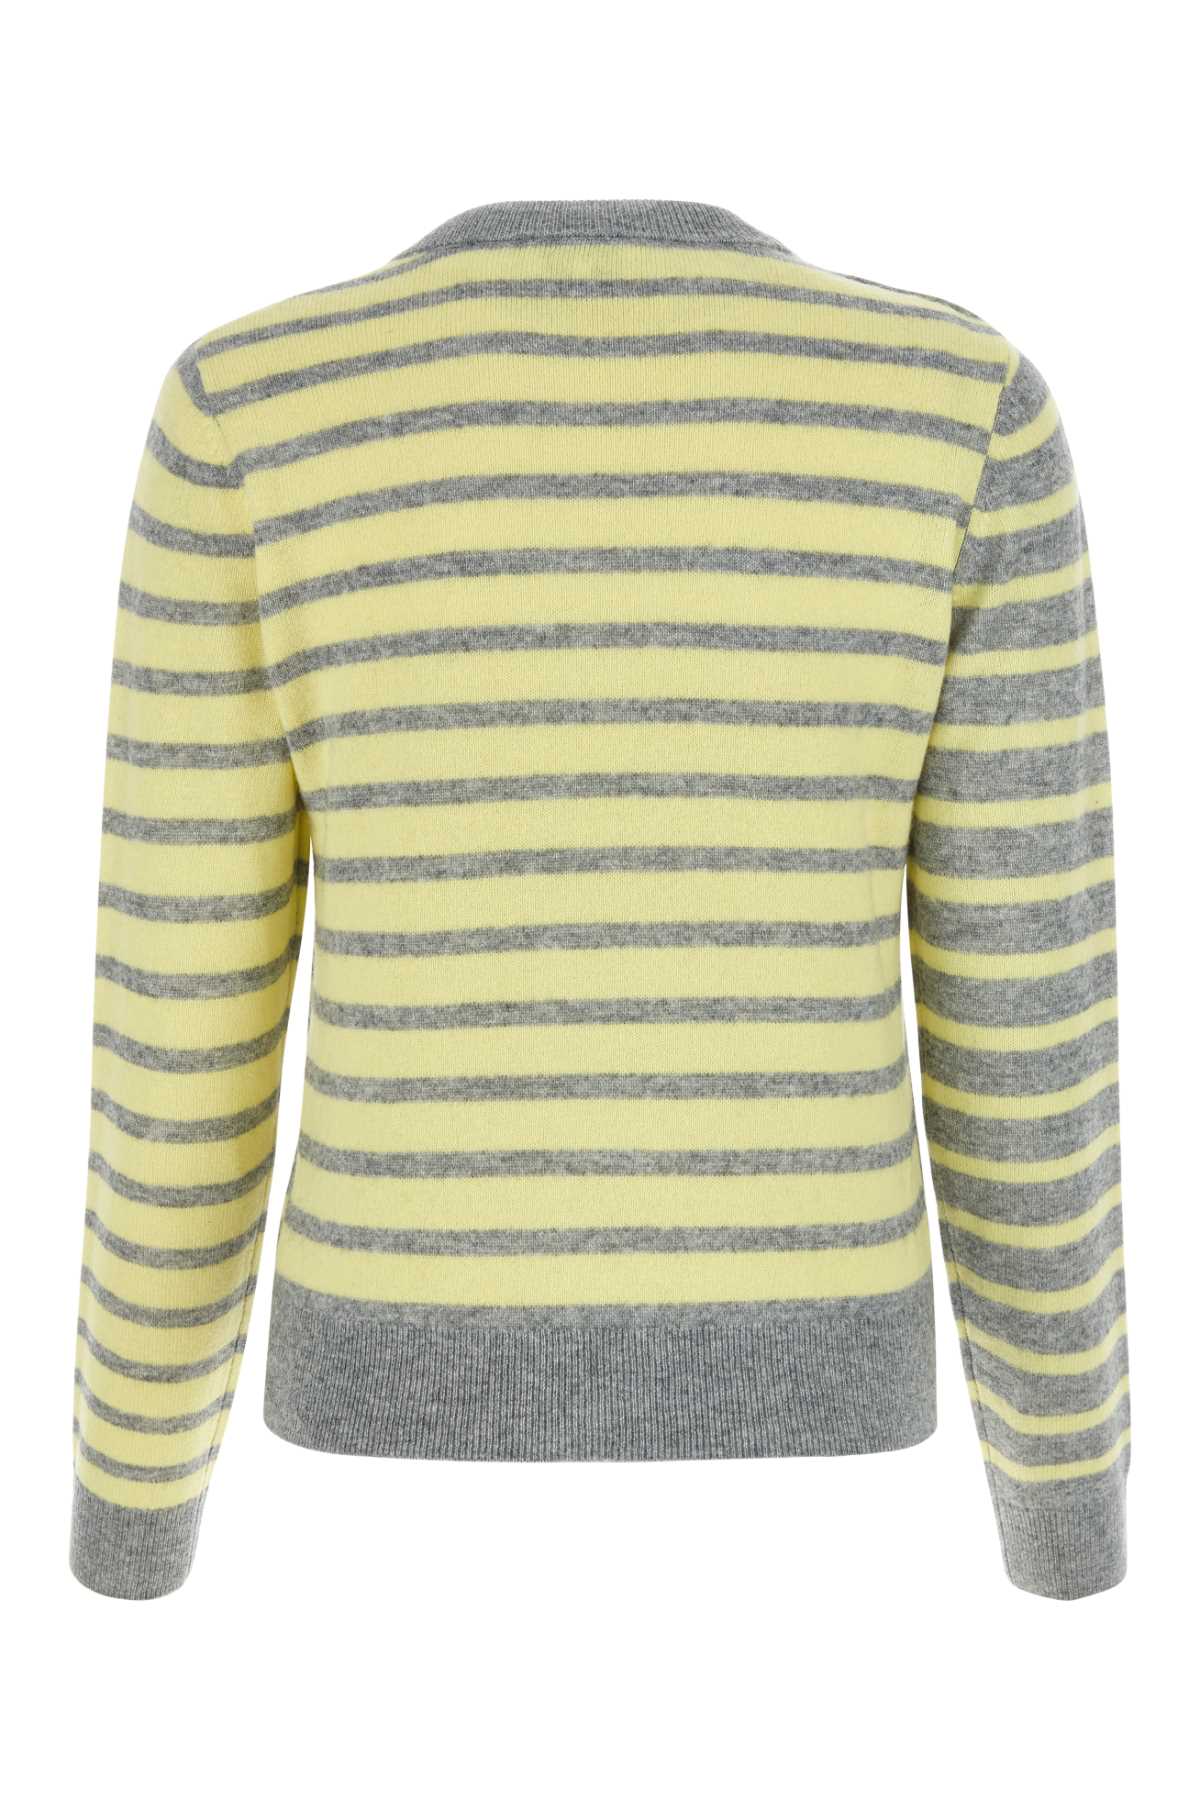 Ganni Embroidered Wool Blend Sweater In Yellowcream